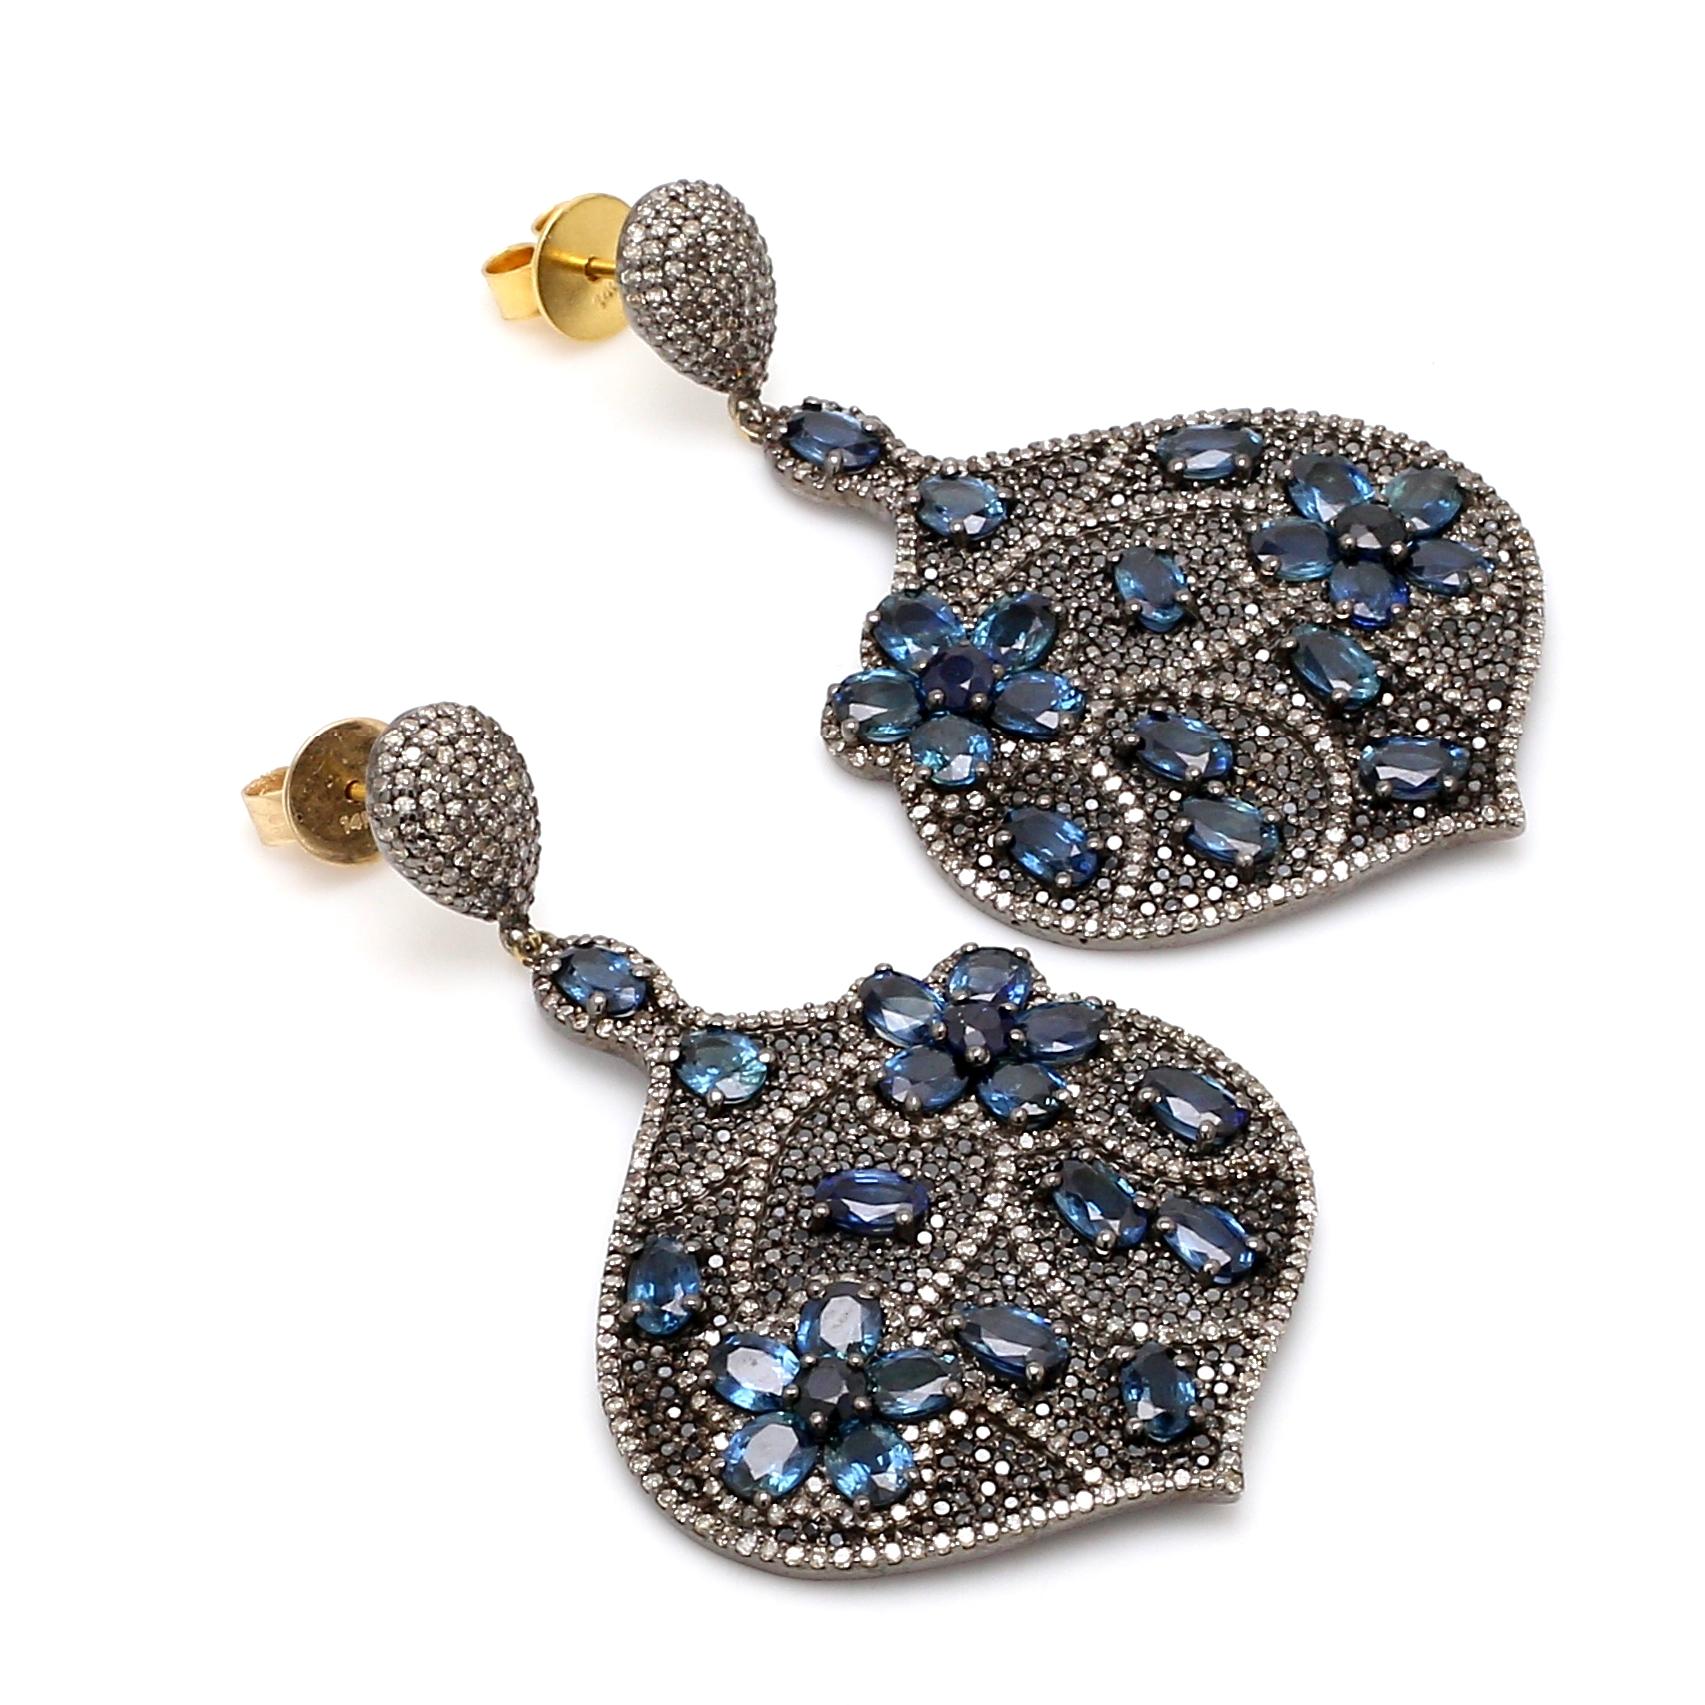 12.68 Carat Blue Sapphire and Diamond Dangle Earrings in Victorian Style

This Victorian period articulate art-deco style deep blue sapphire and diamond earring is strikingly gorgeous. The sensational outward fancy pear shape is covered with the